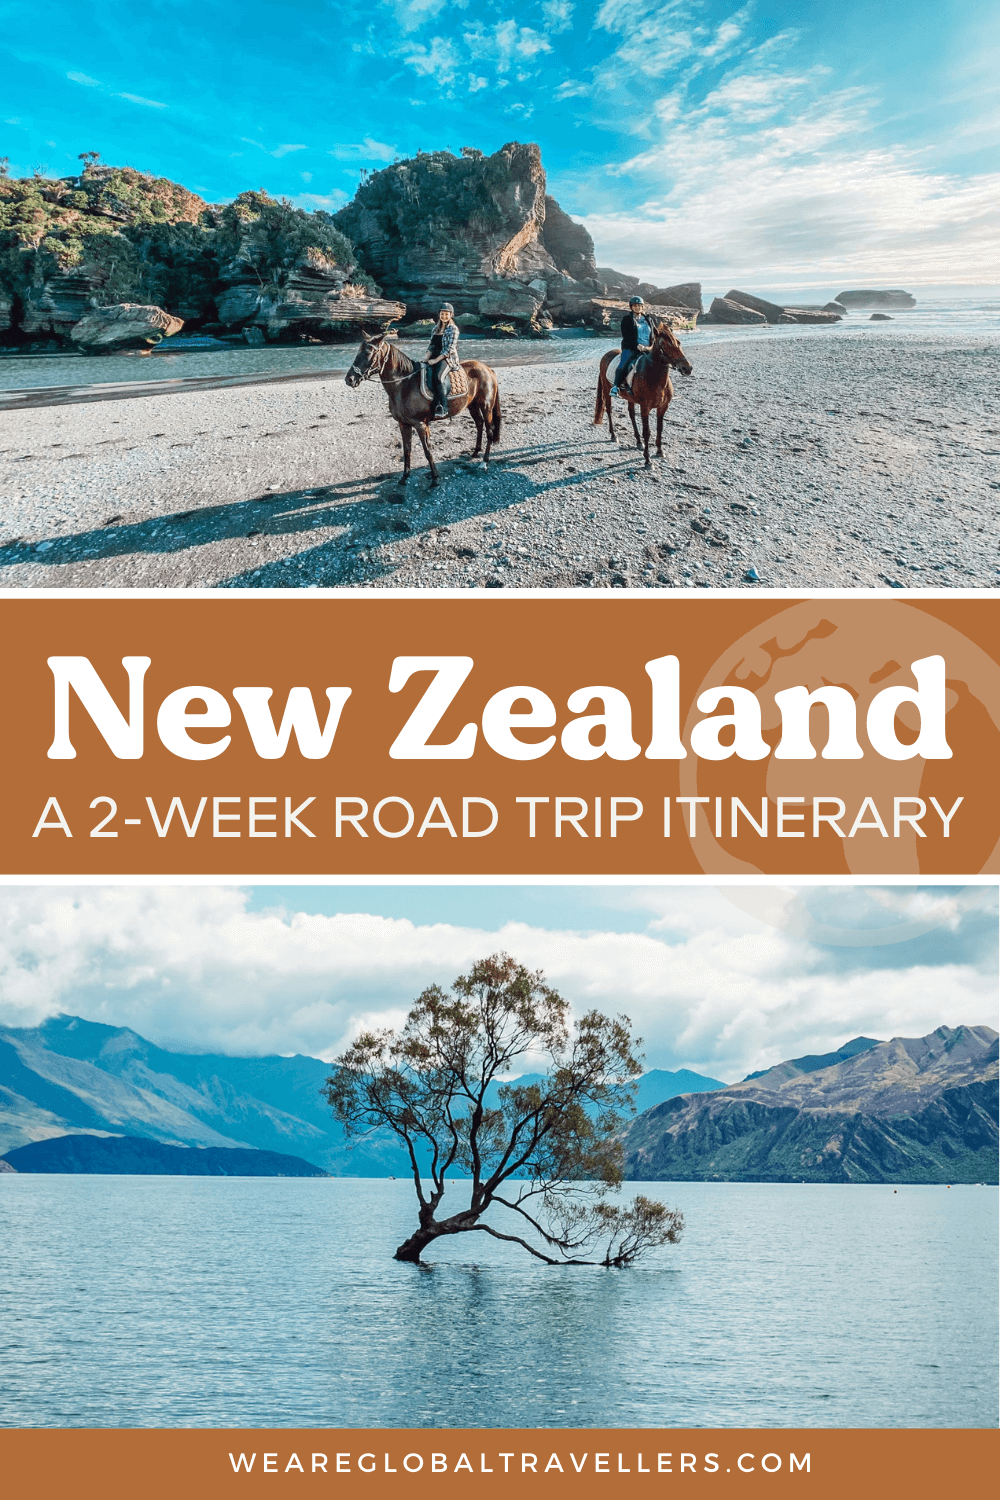 The ultimate 2-week road trip itinerary for New Zealand